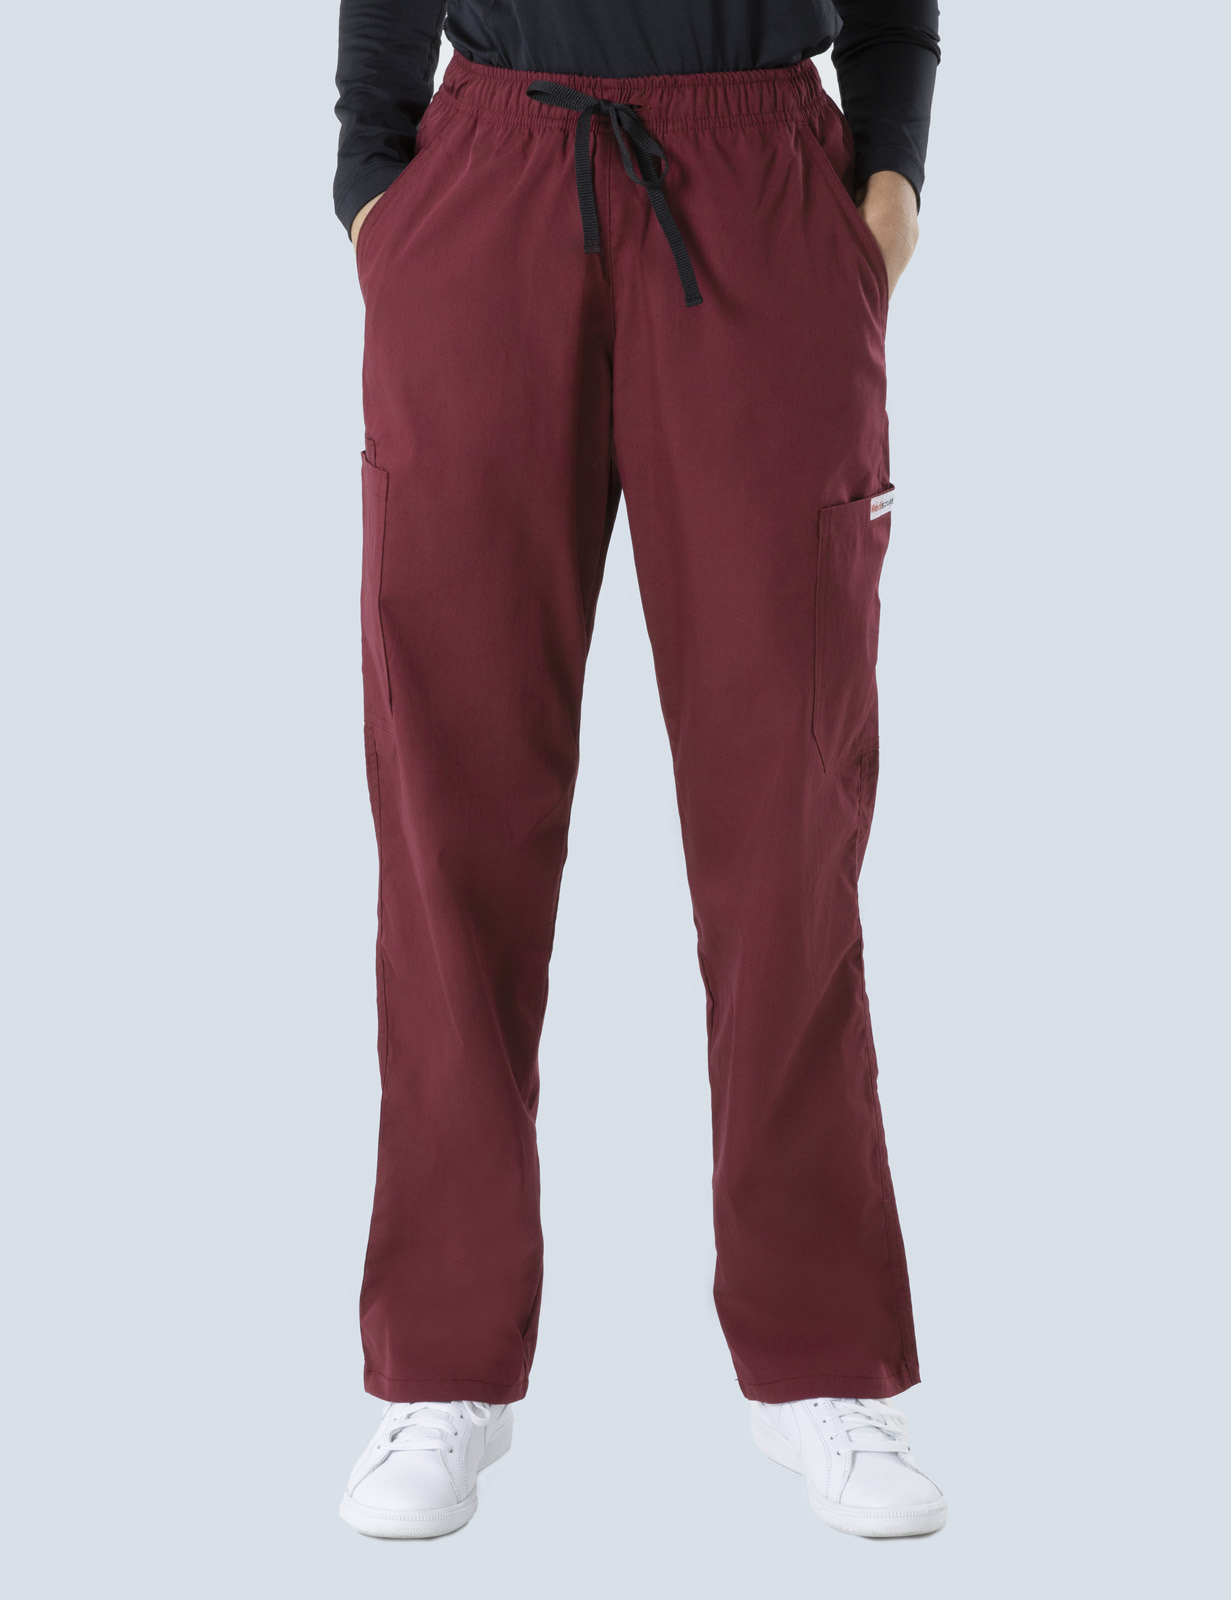 Maleny Hospital - Nursing Practitioner (Women's Fit Solid Scrub Top and Cargo Pants in Burgundy incl Logos)